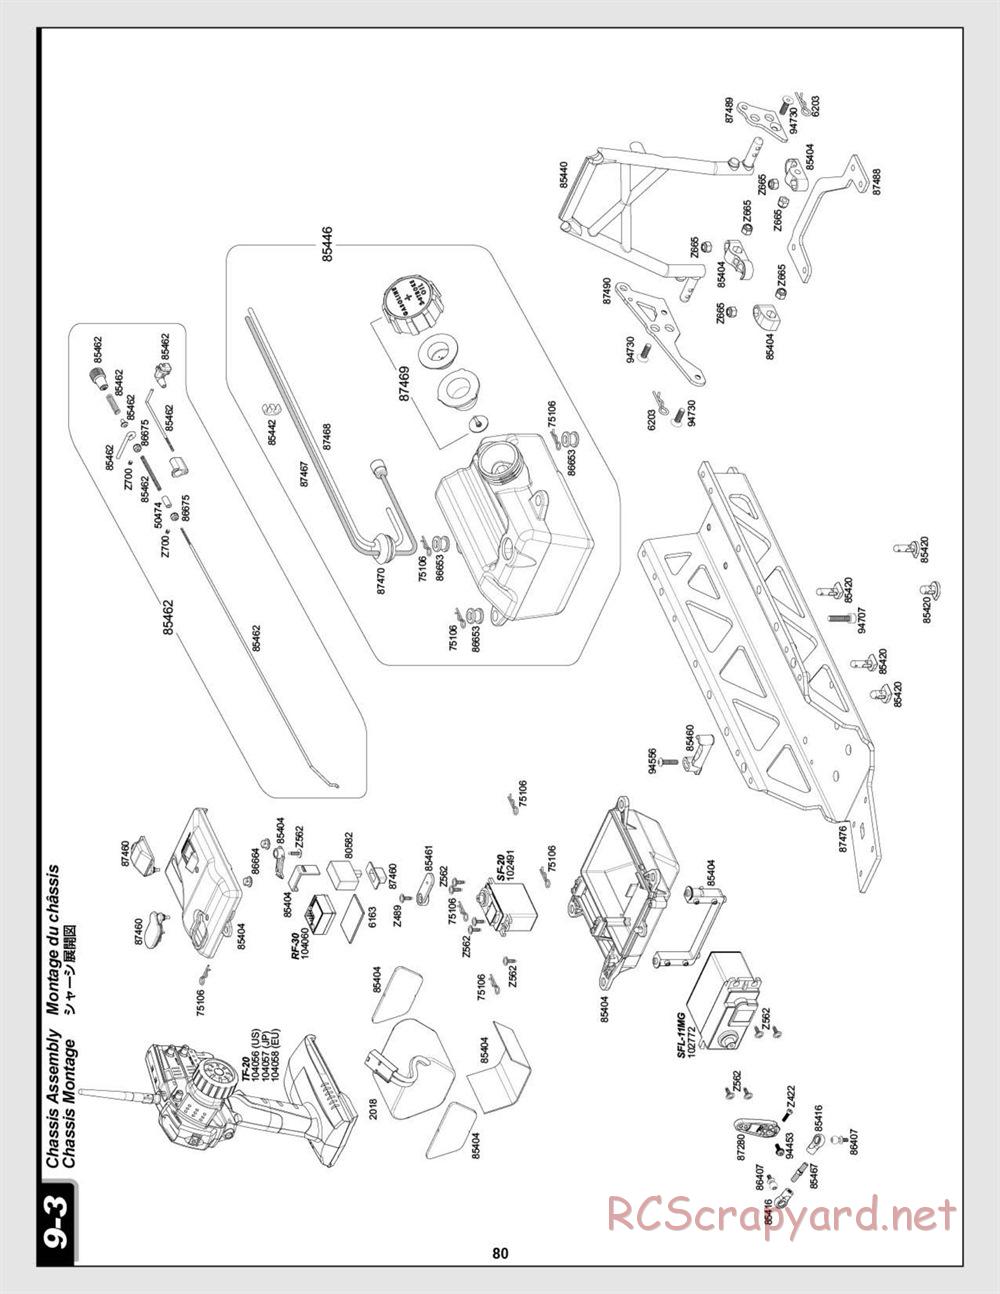 HPI - Baja 5T - Exploded View - Page 80